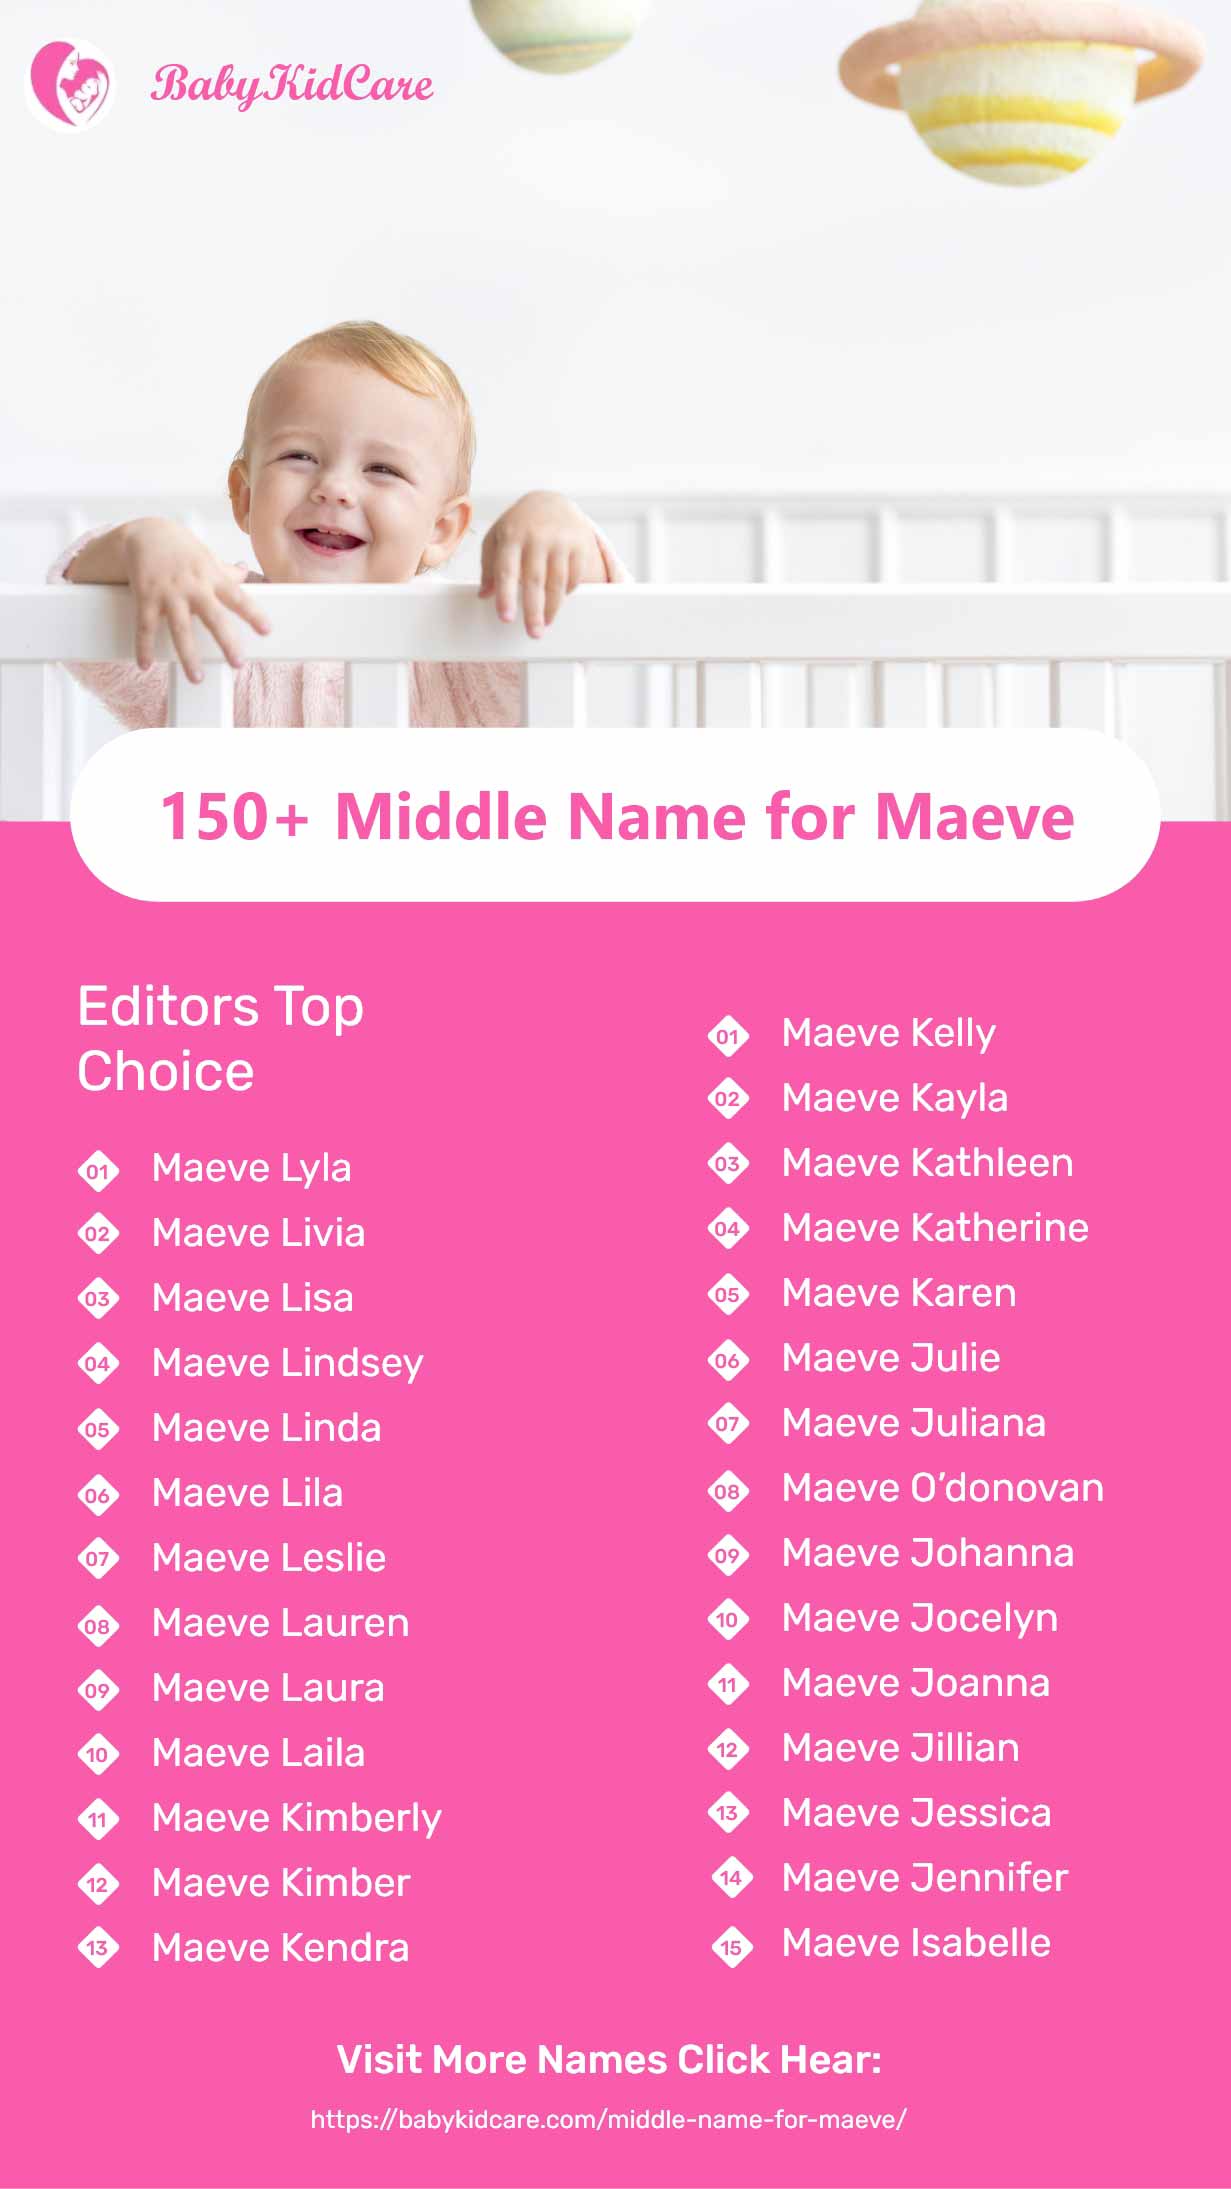 Middle Name for Maeve